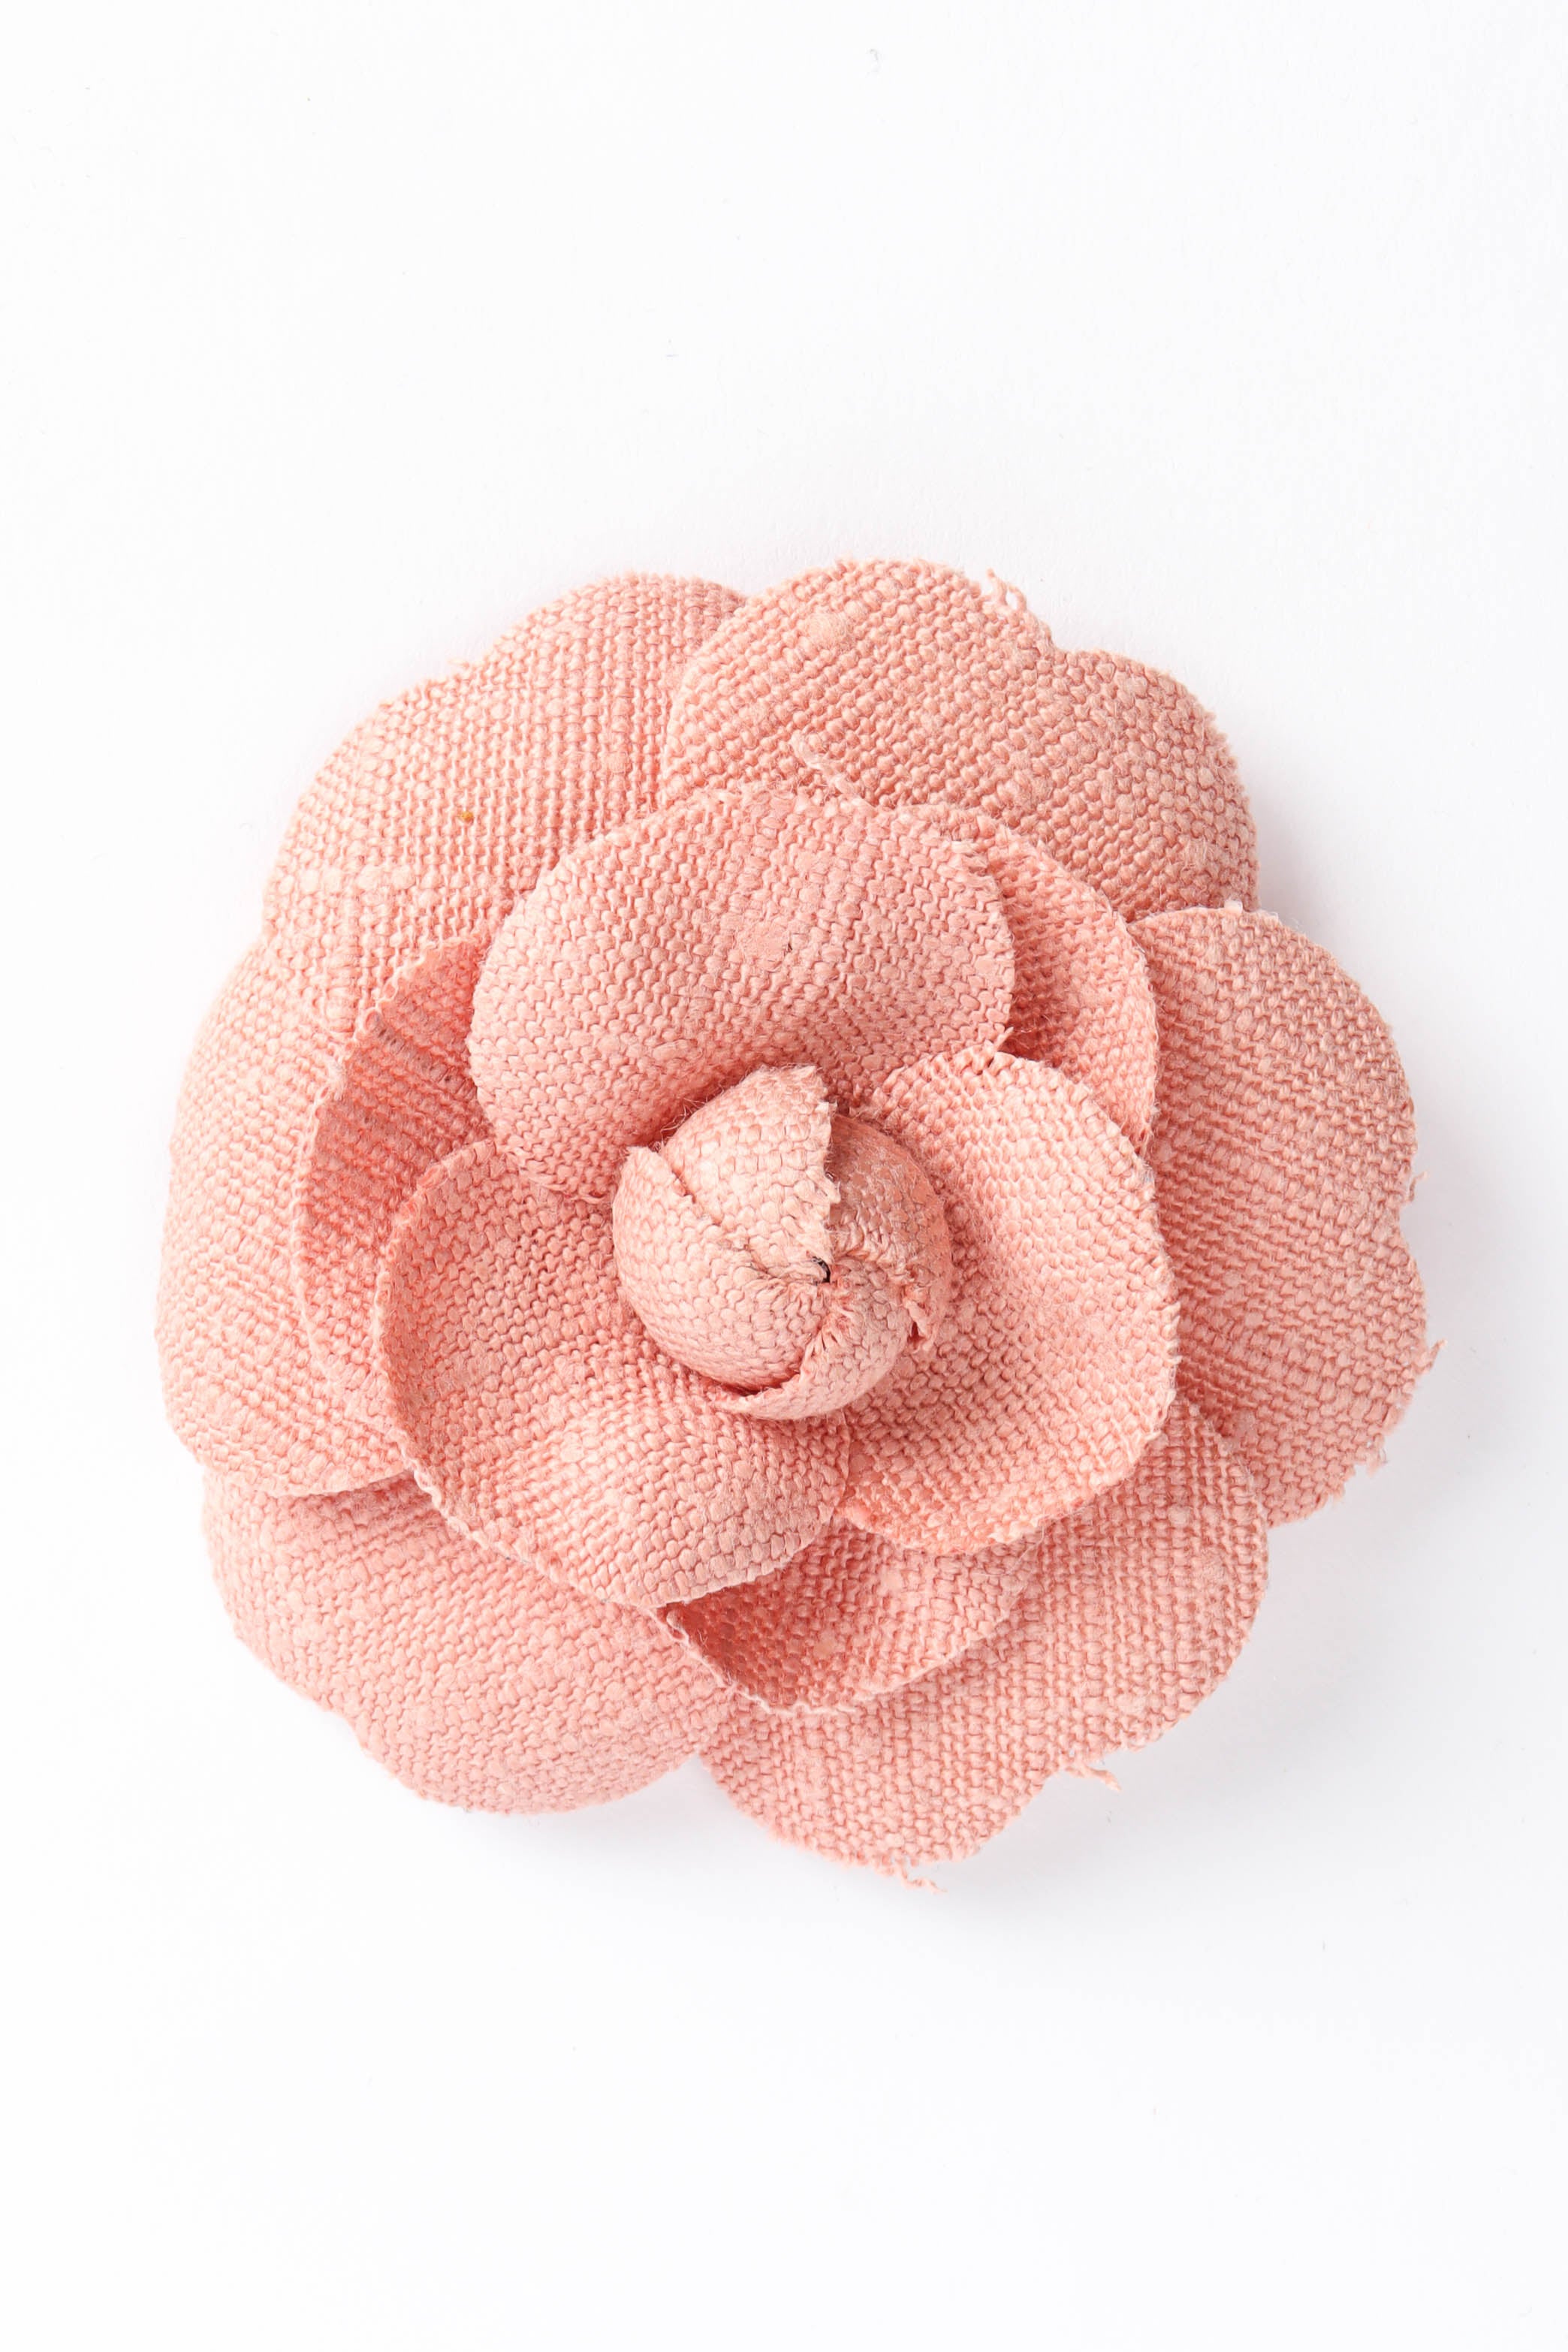 Chanel's Camellia – Beautiful Brooches for Spring, MyThirtySpot